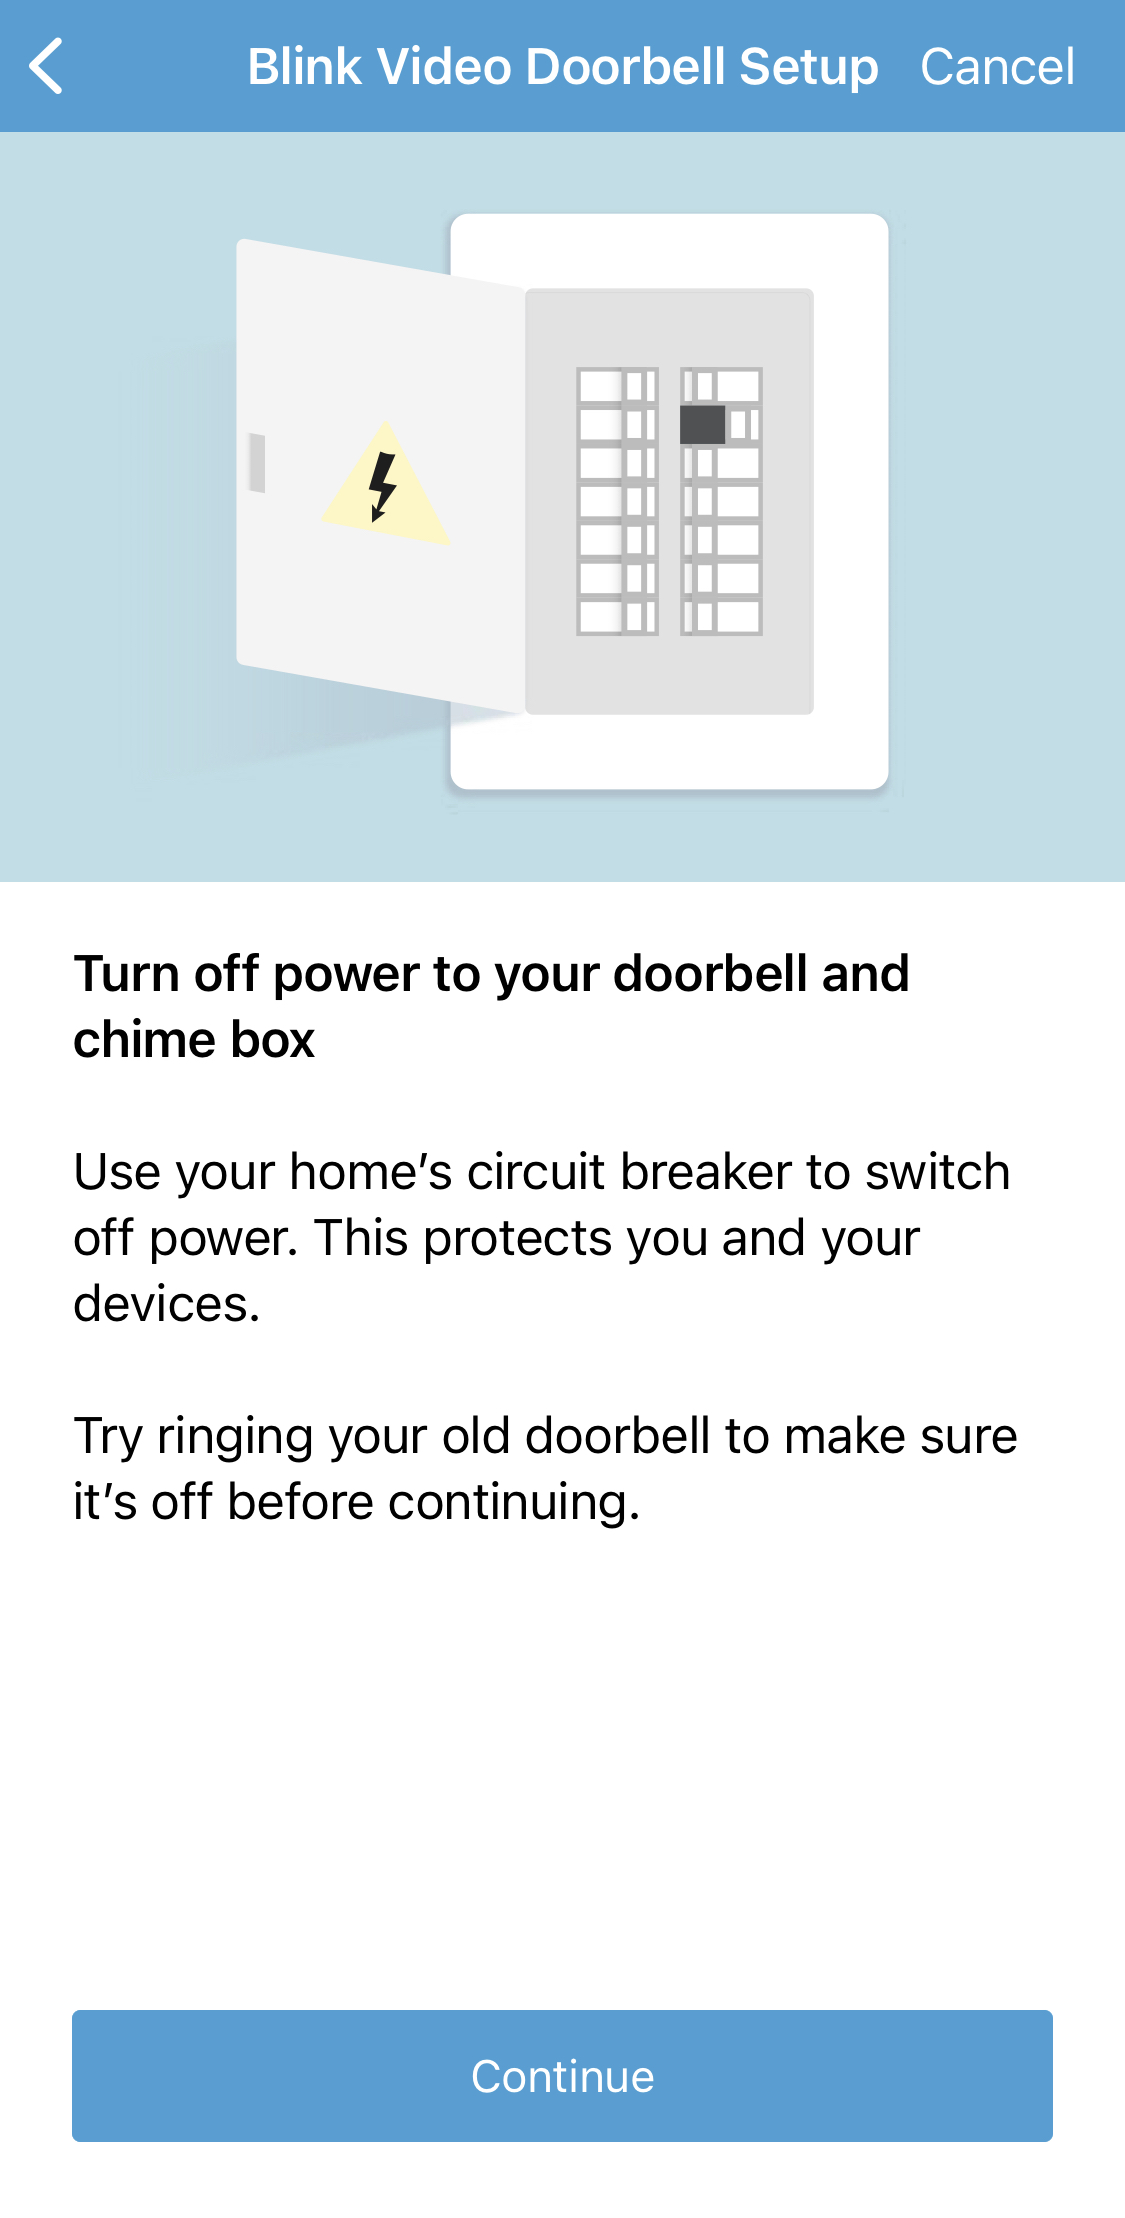 image of a power breaker showing that all power must be cut off from the wires you will attach the doorbell to